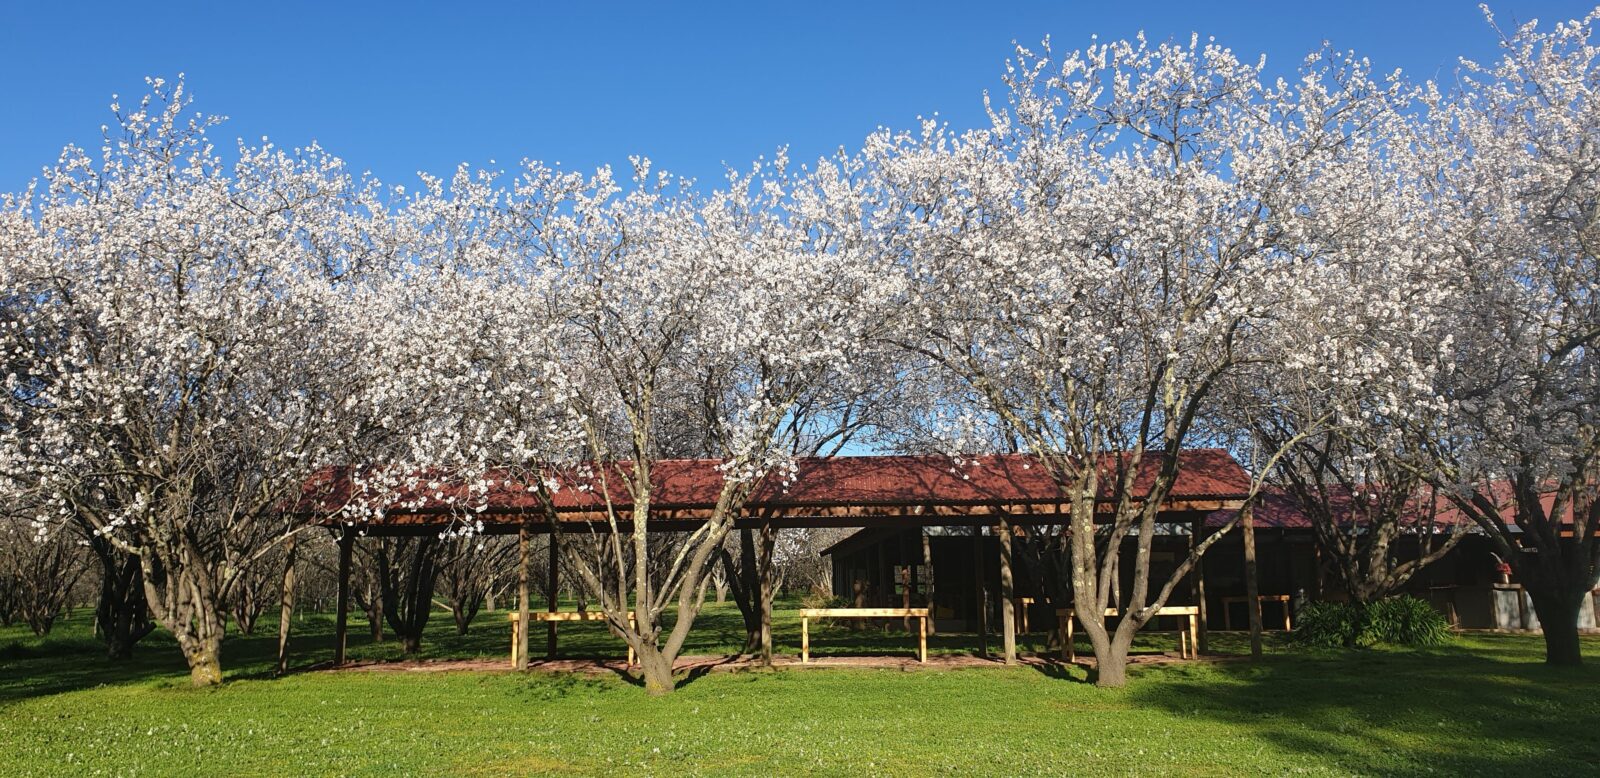 Spring almond blossoms in the outdoor dining area of The Watchbox